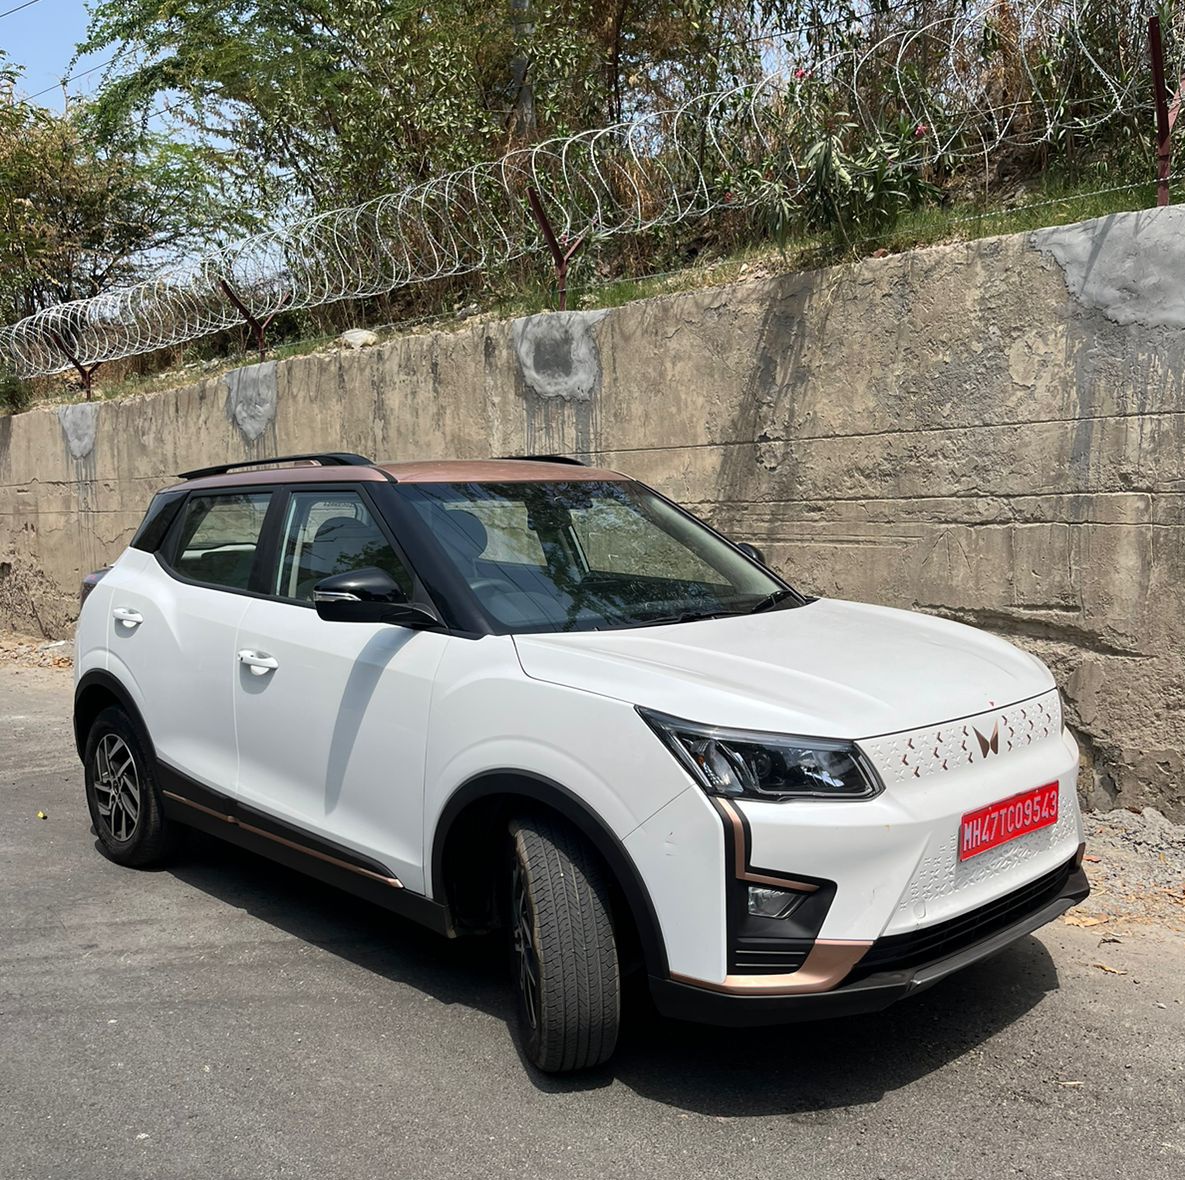 Will be driving the new XUV 3XO day after tomorrow but having lived with the XUV400 for three weeks, the key feature upgrades have done wonders for its appeal. 3X0 though has more over the XUV400 including a panoramic sunroof which given the craze for sunroofs is a big deal